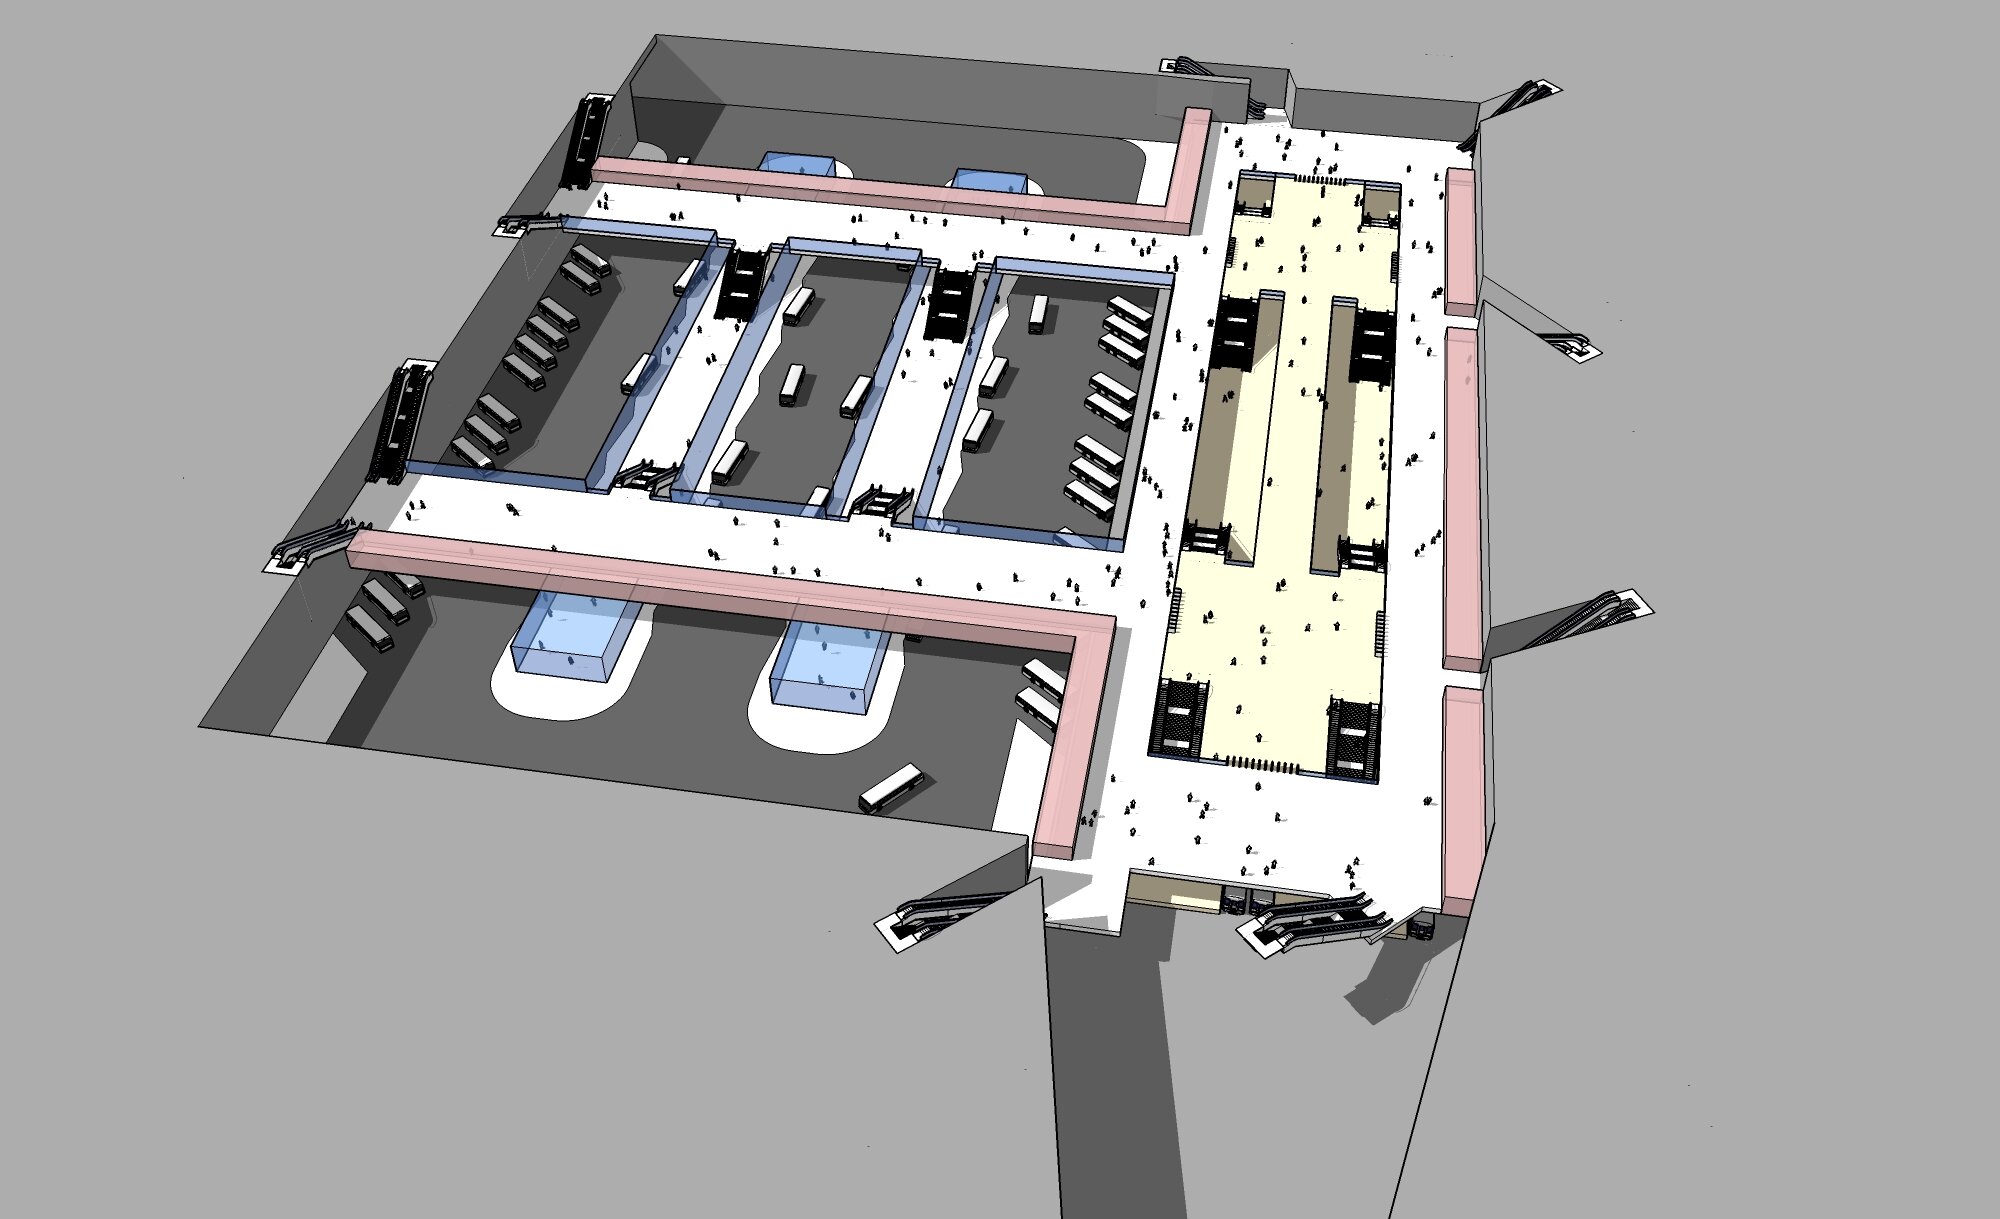 View of the 3D model of one of the concepts developed for the transport hub